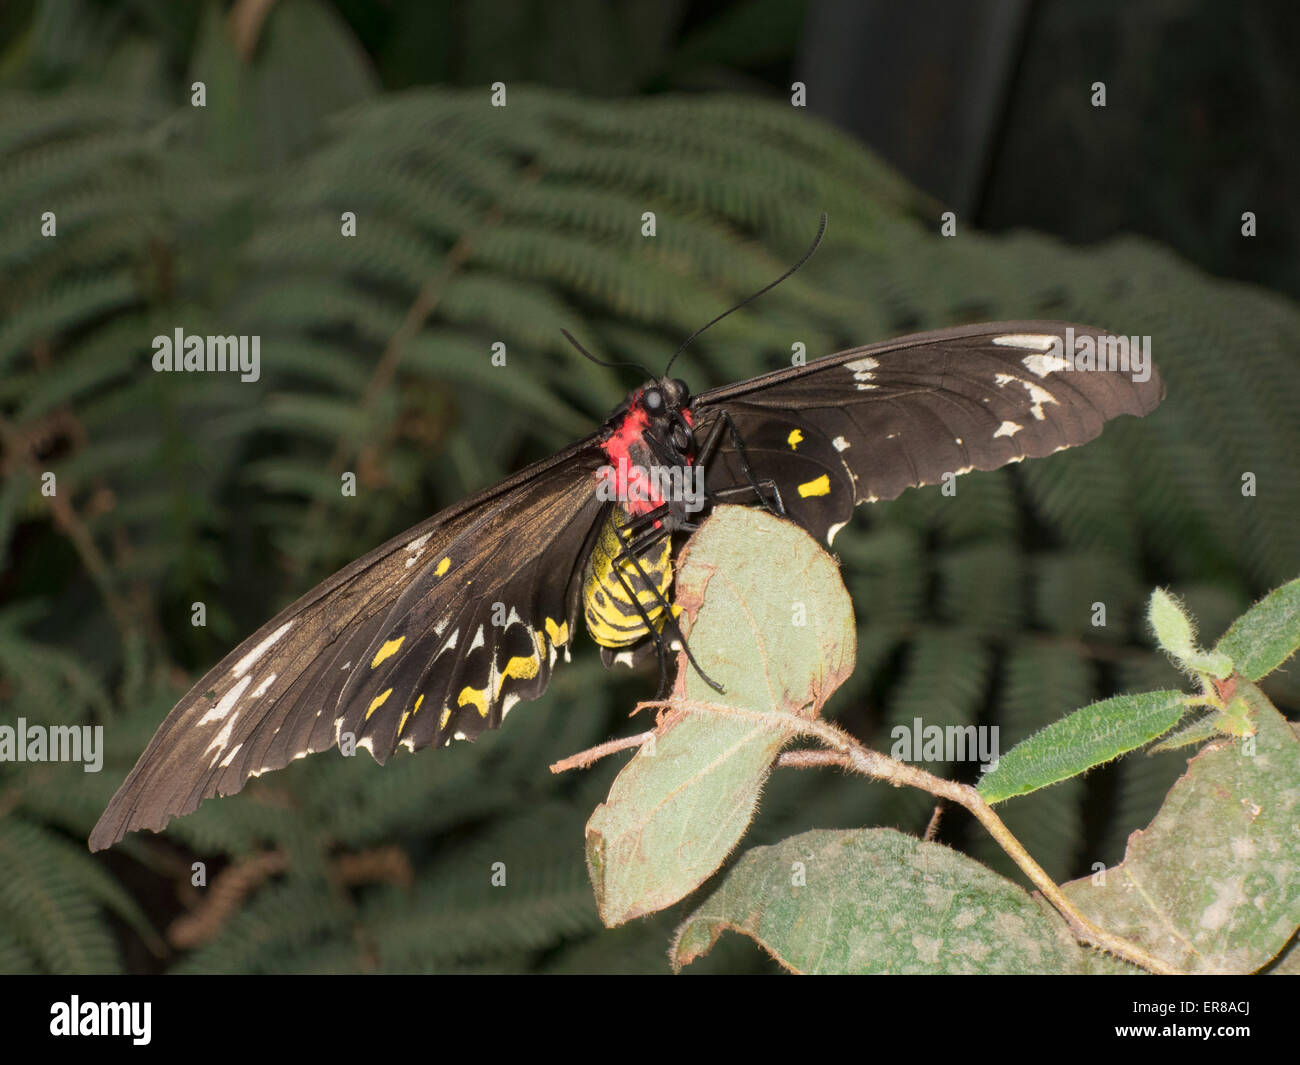 Close-up of Cairns Birdwing butterfly on plant Stock Photo